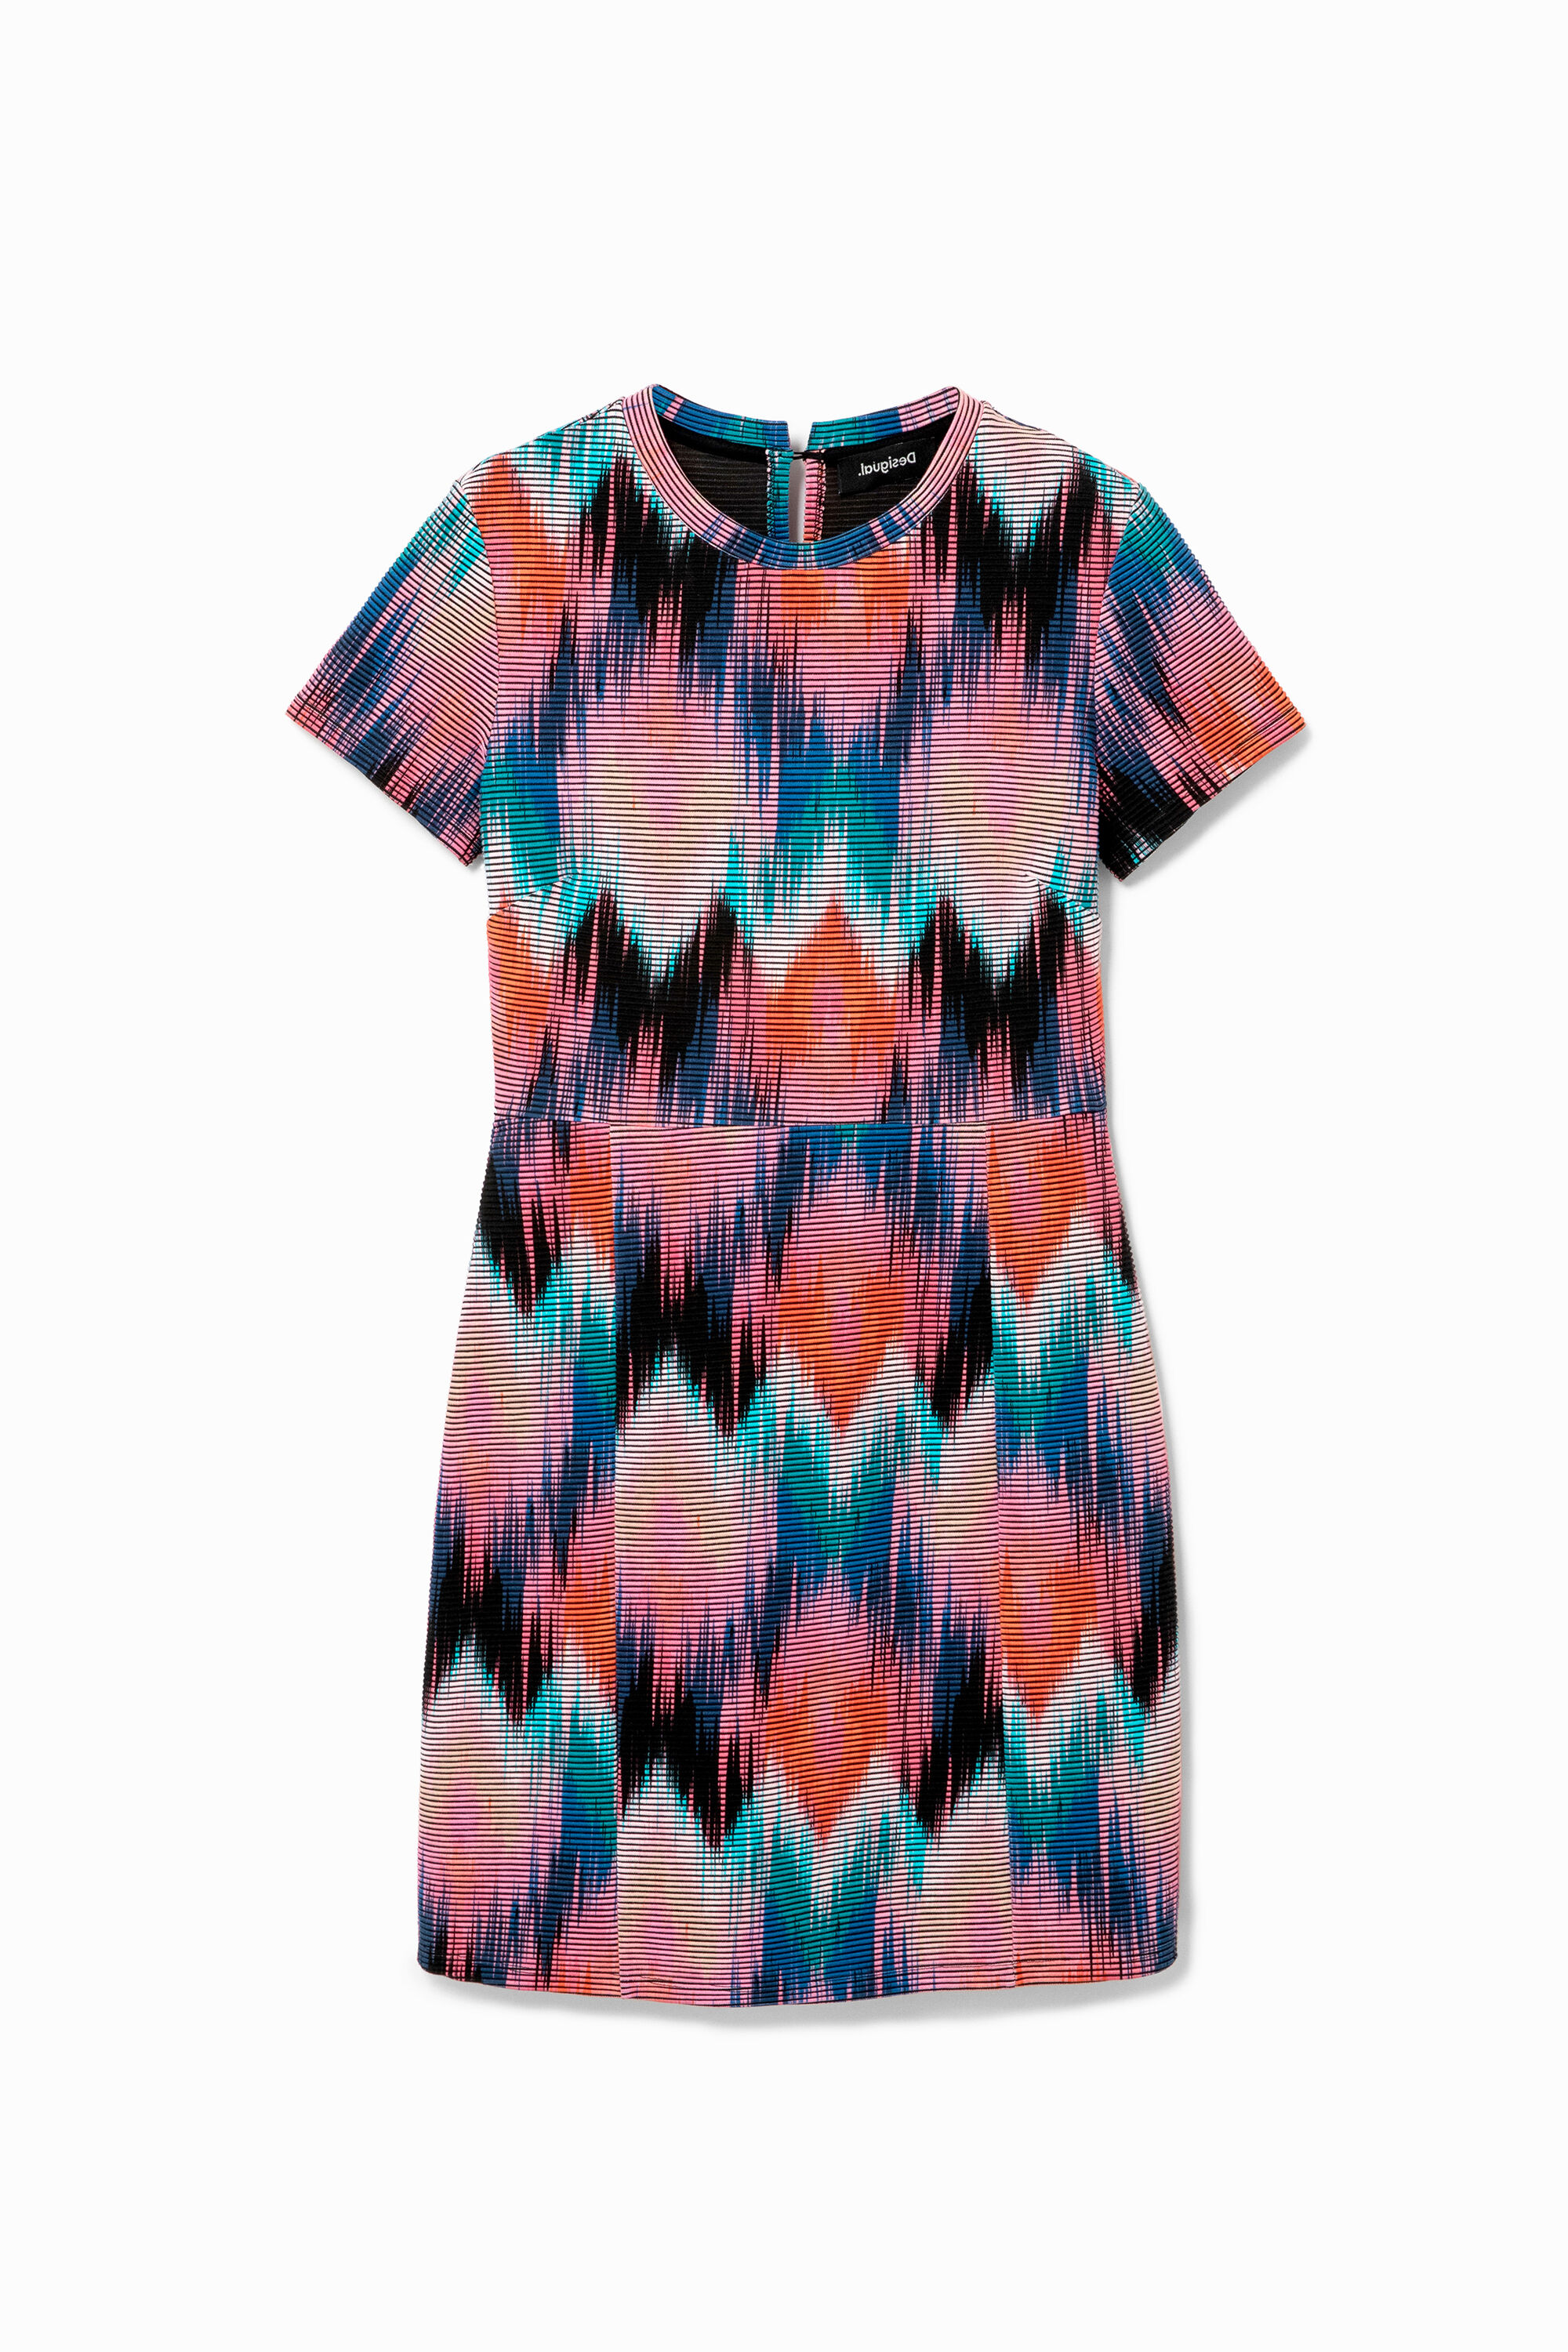 Arty psychedelic diamonds dress - MATERIAL FINISHES - S